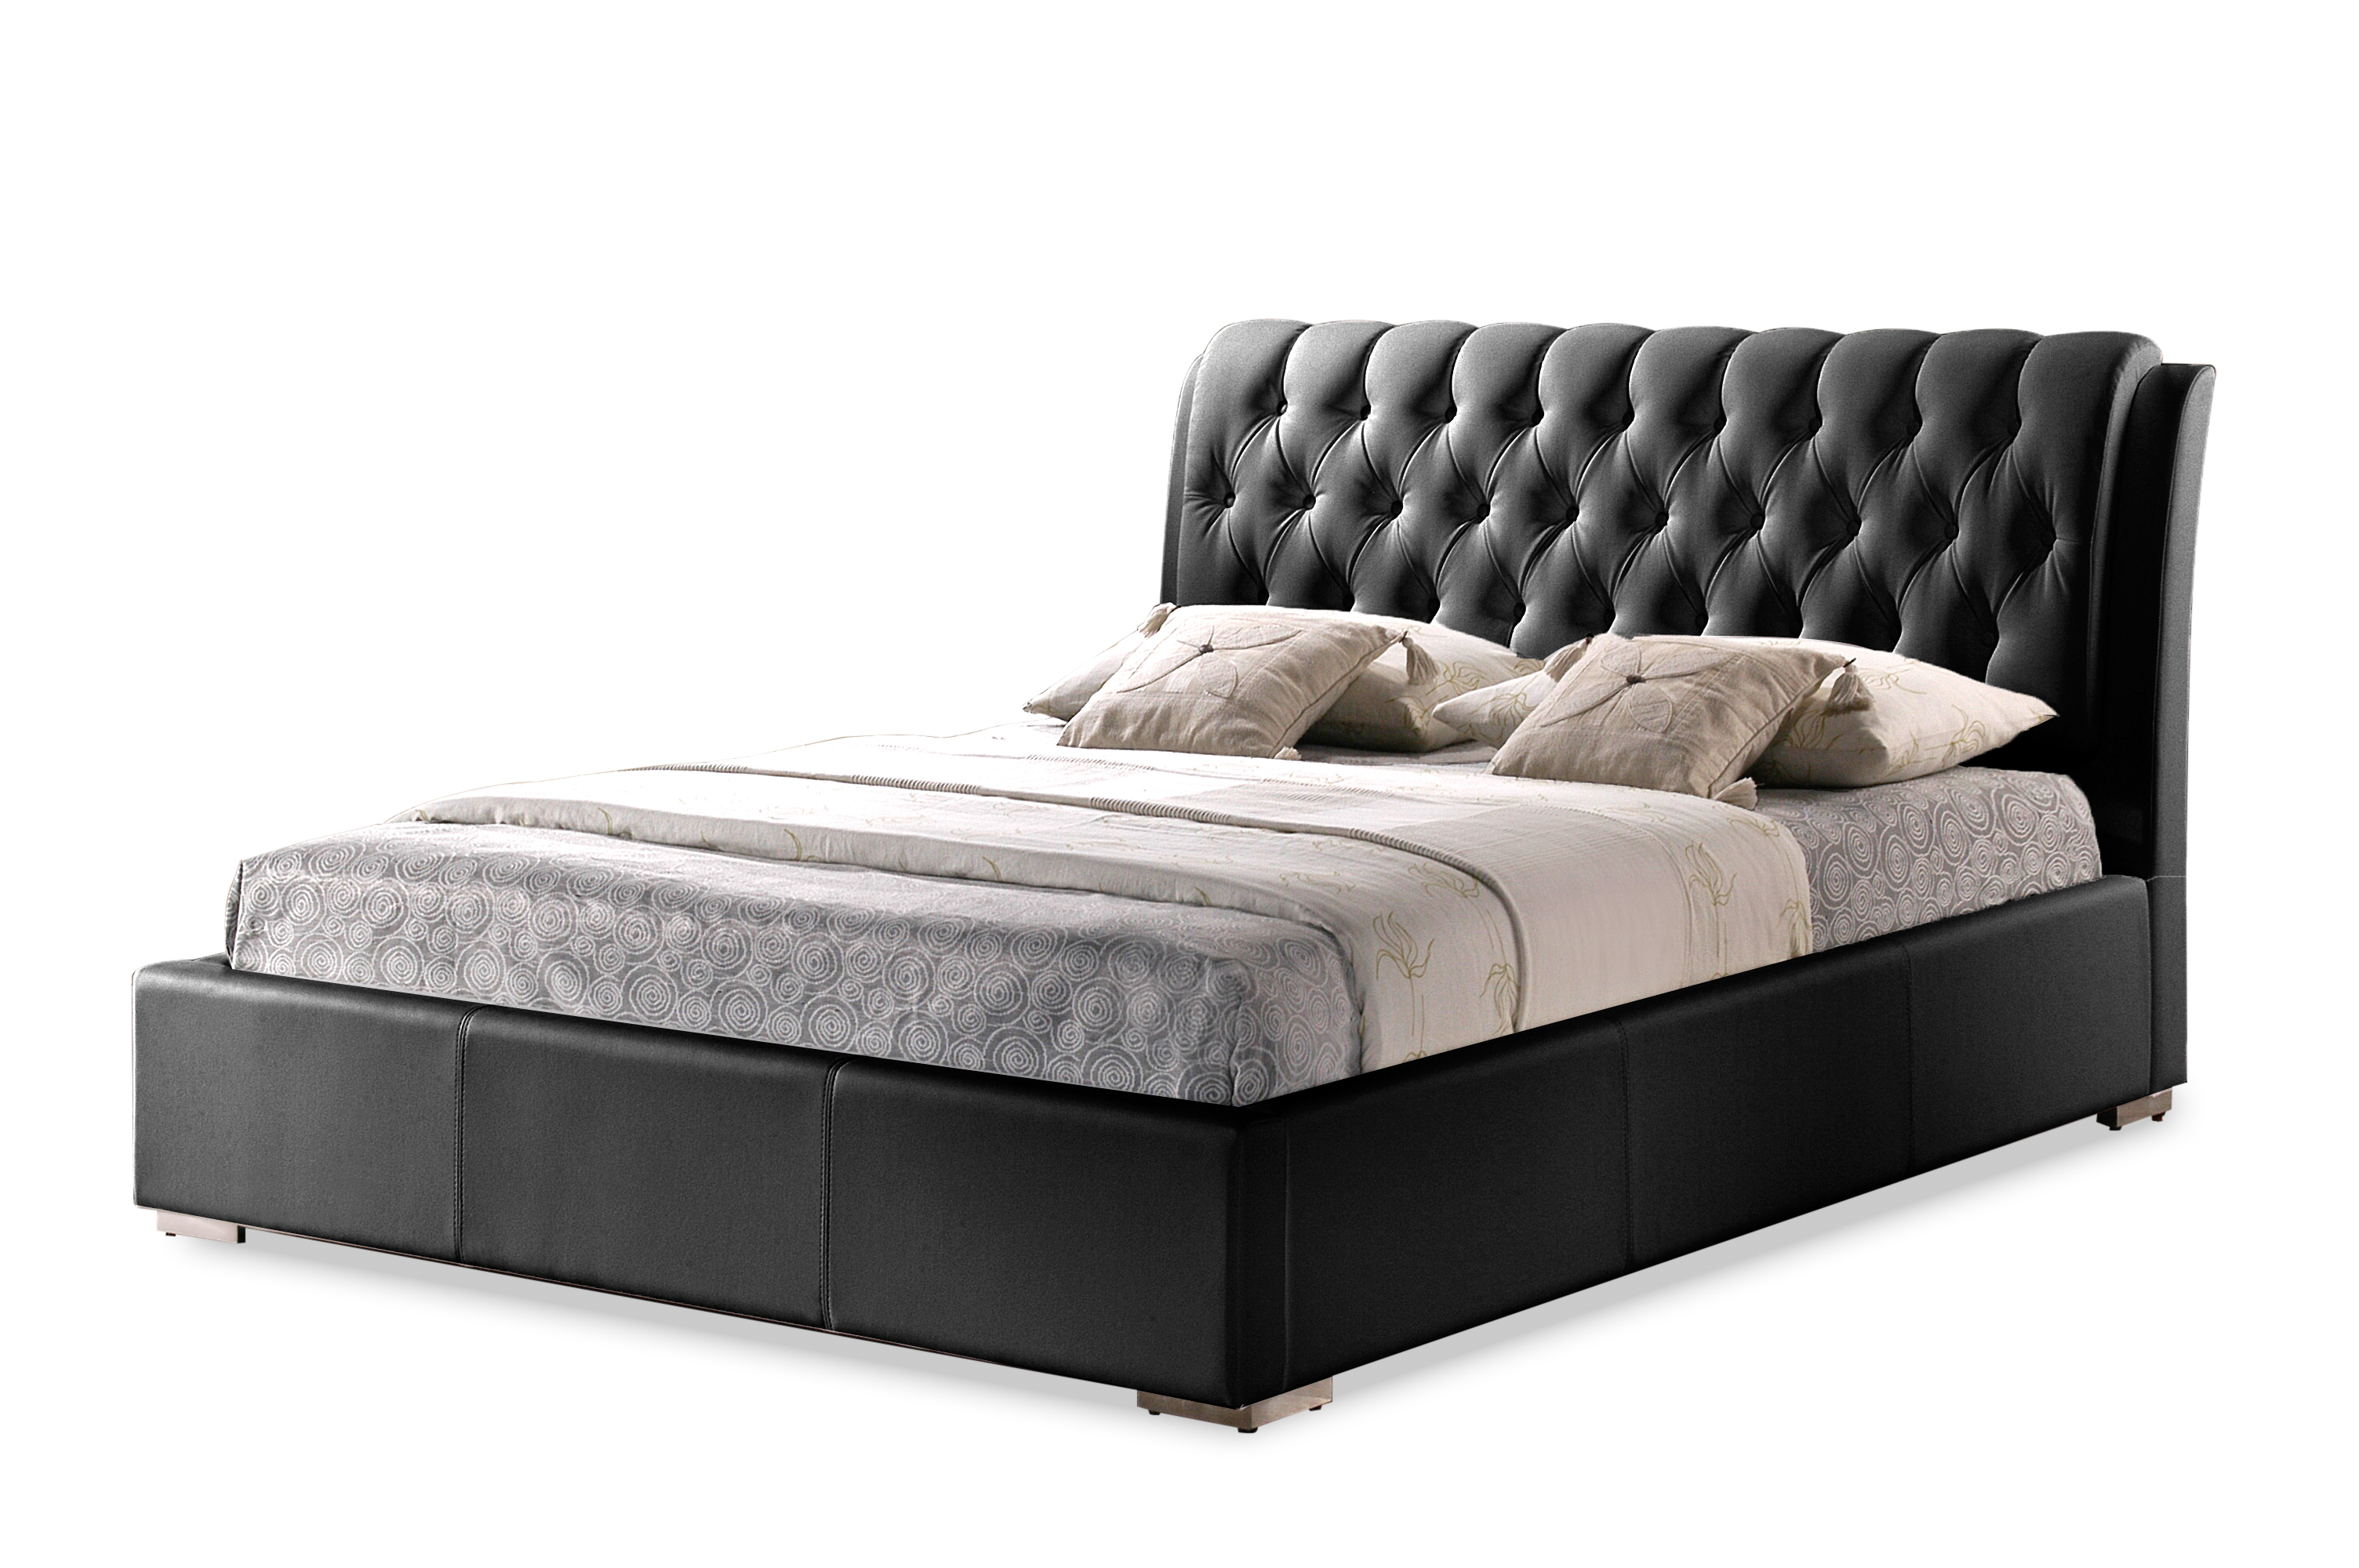 Baxton Studio Bianca Black Modern Bed with Tufted Headboard - Queen Size affordable modern furniture in Chicago, bedroom furniture, Bianca Black Modern Bed with Tufted Headboard - Queen Size